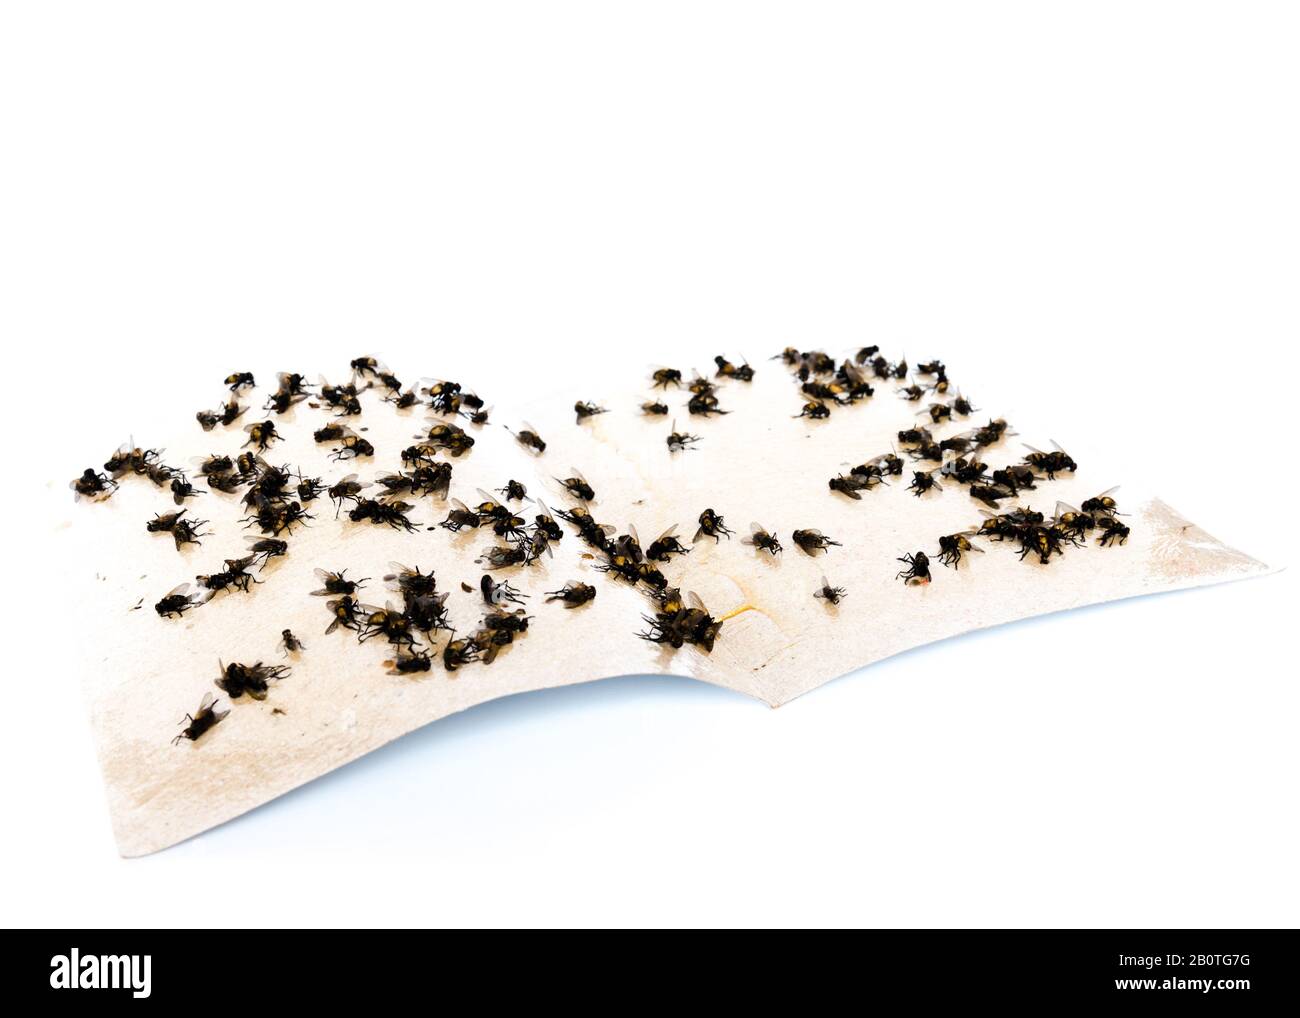 https://c8.alamy.com/comp/2B0TG7G/sticky-fly-tape-with-many-flies-trapped-on-the-extremely-sticky-surface-paper-trap-isolated-on-white-background-popular-insect-collecting-method-in-2B0TG7G.jpg